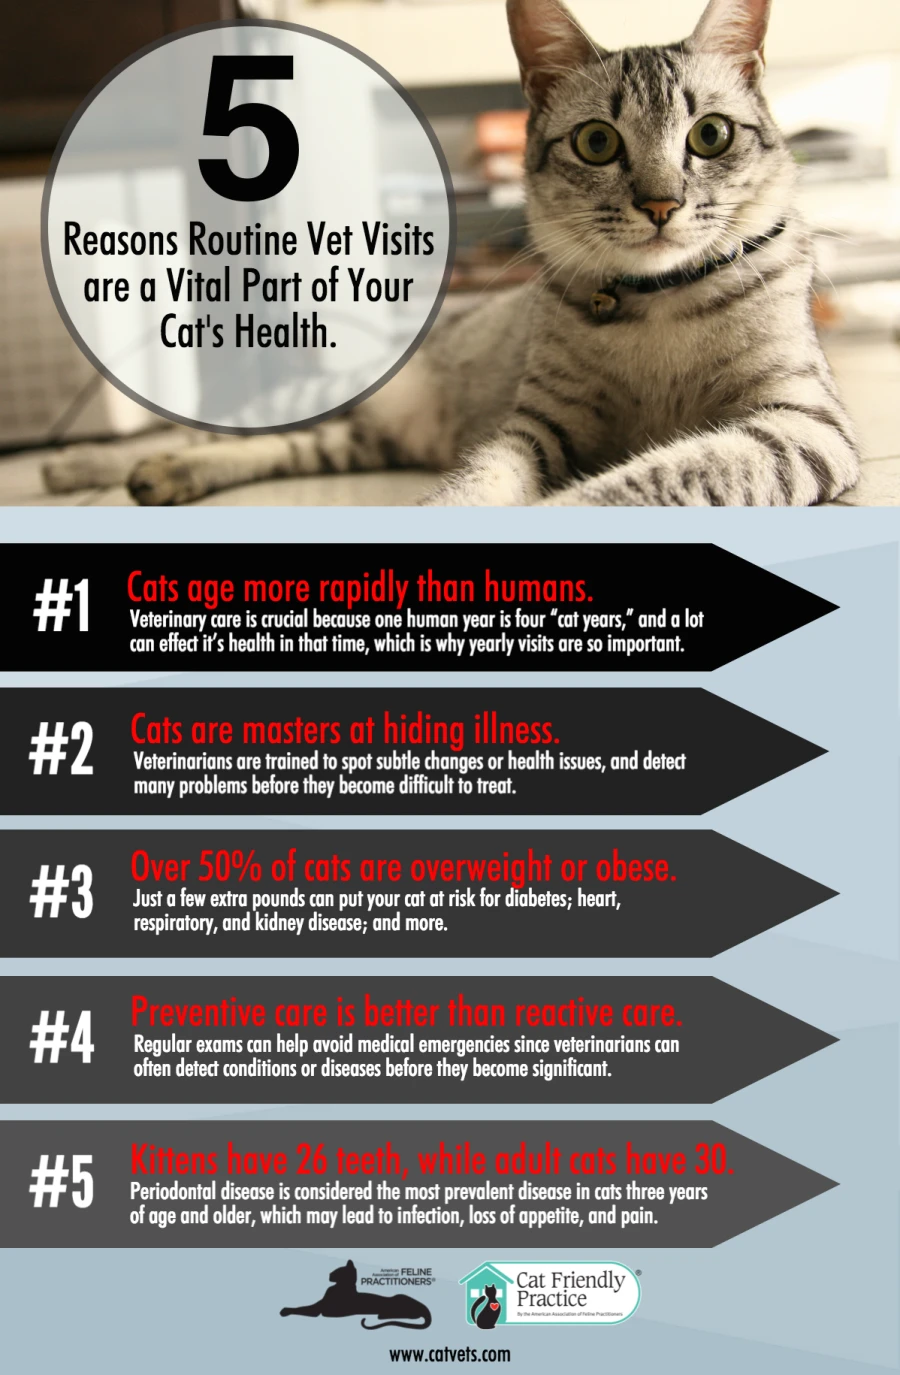 5 reasons routine vet visits are an important part of your cat's health - national bring your cat to the vet day